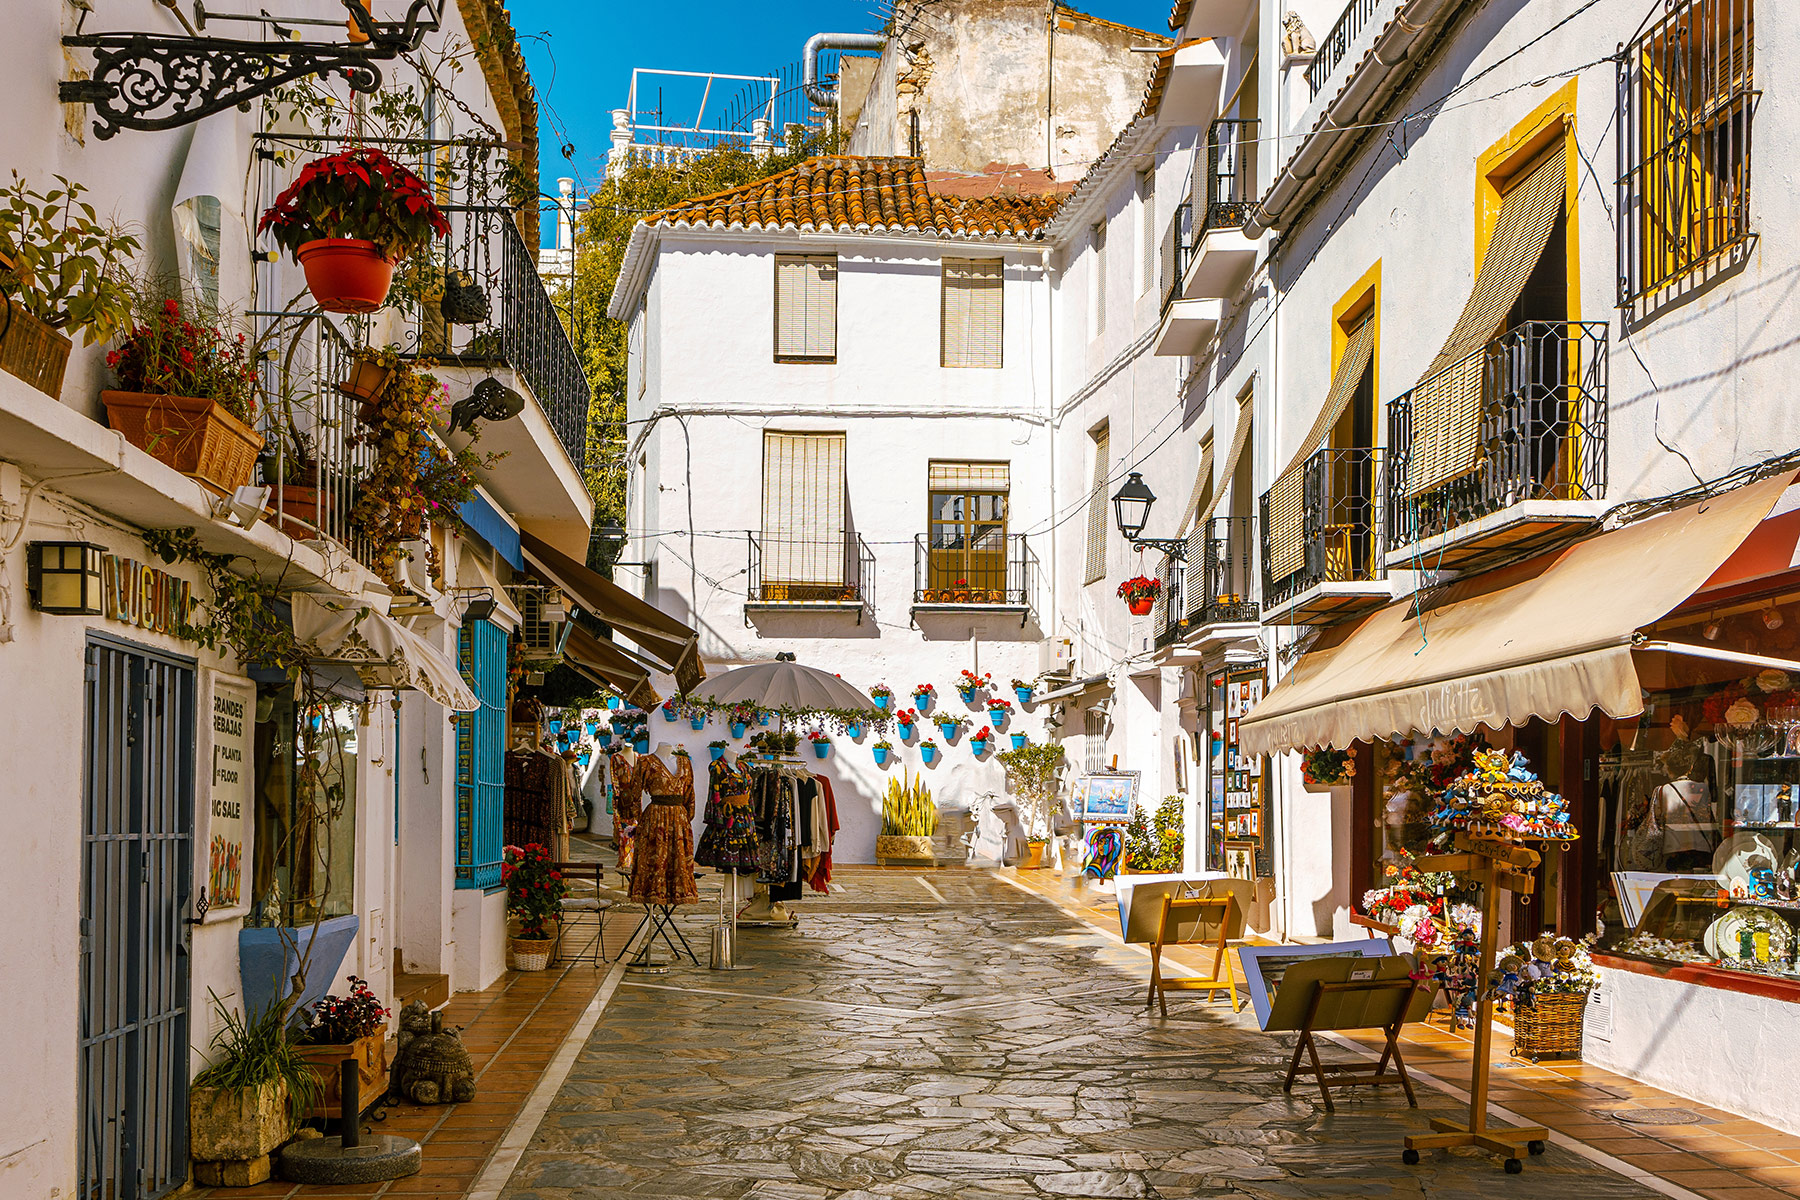 Paved street and white houses in Marbella old town